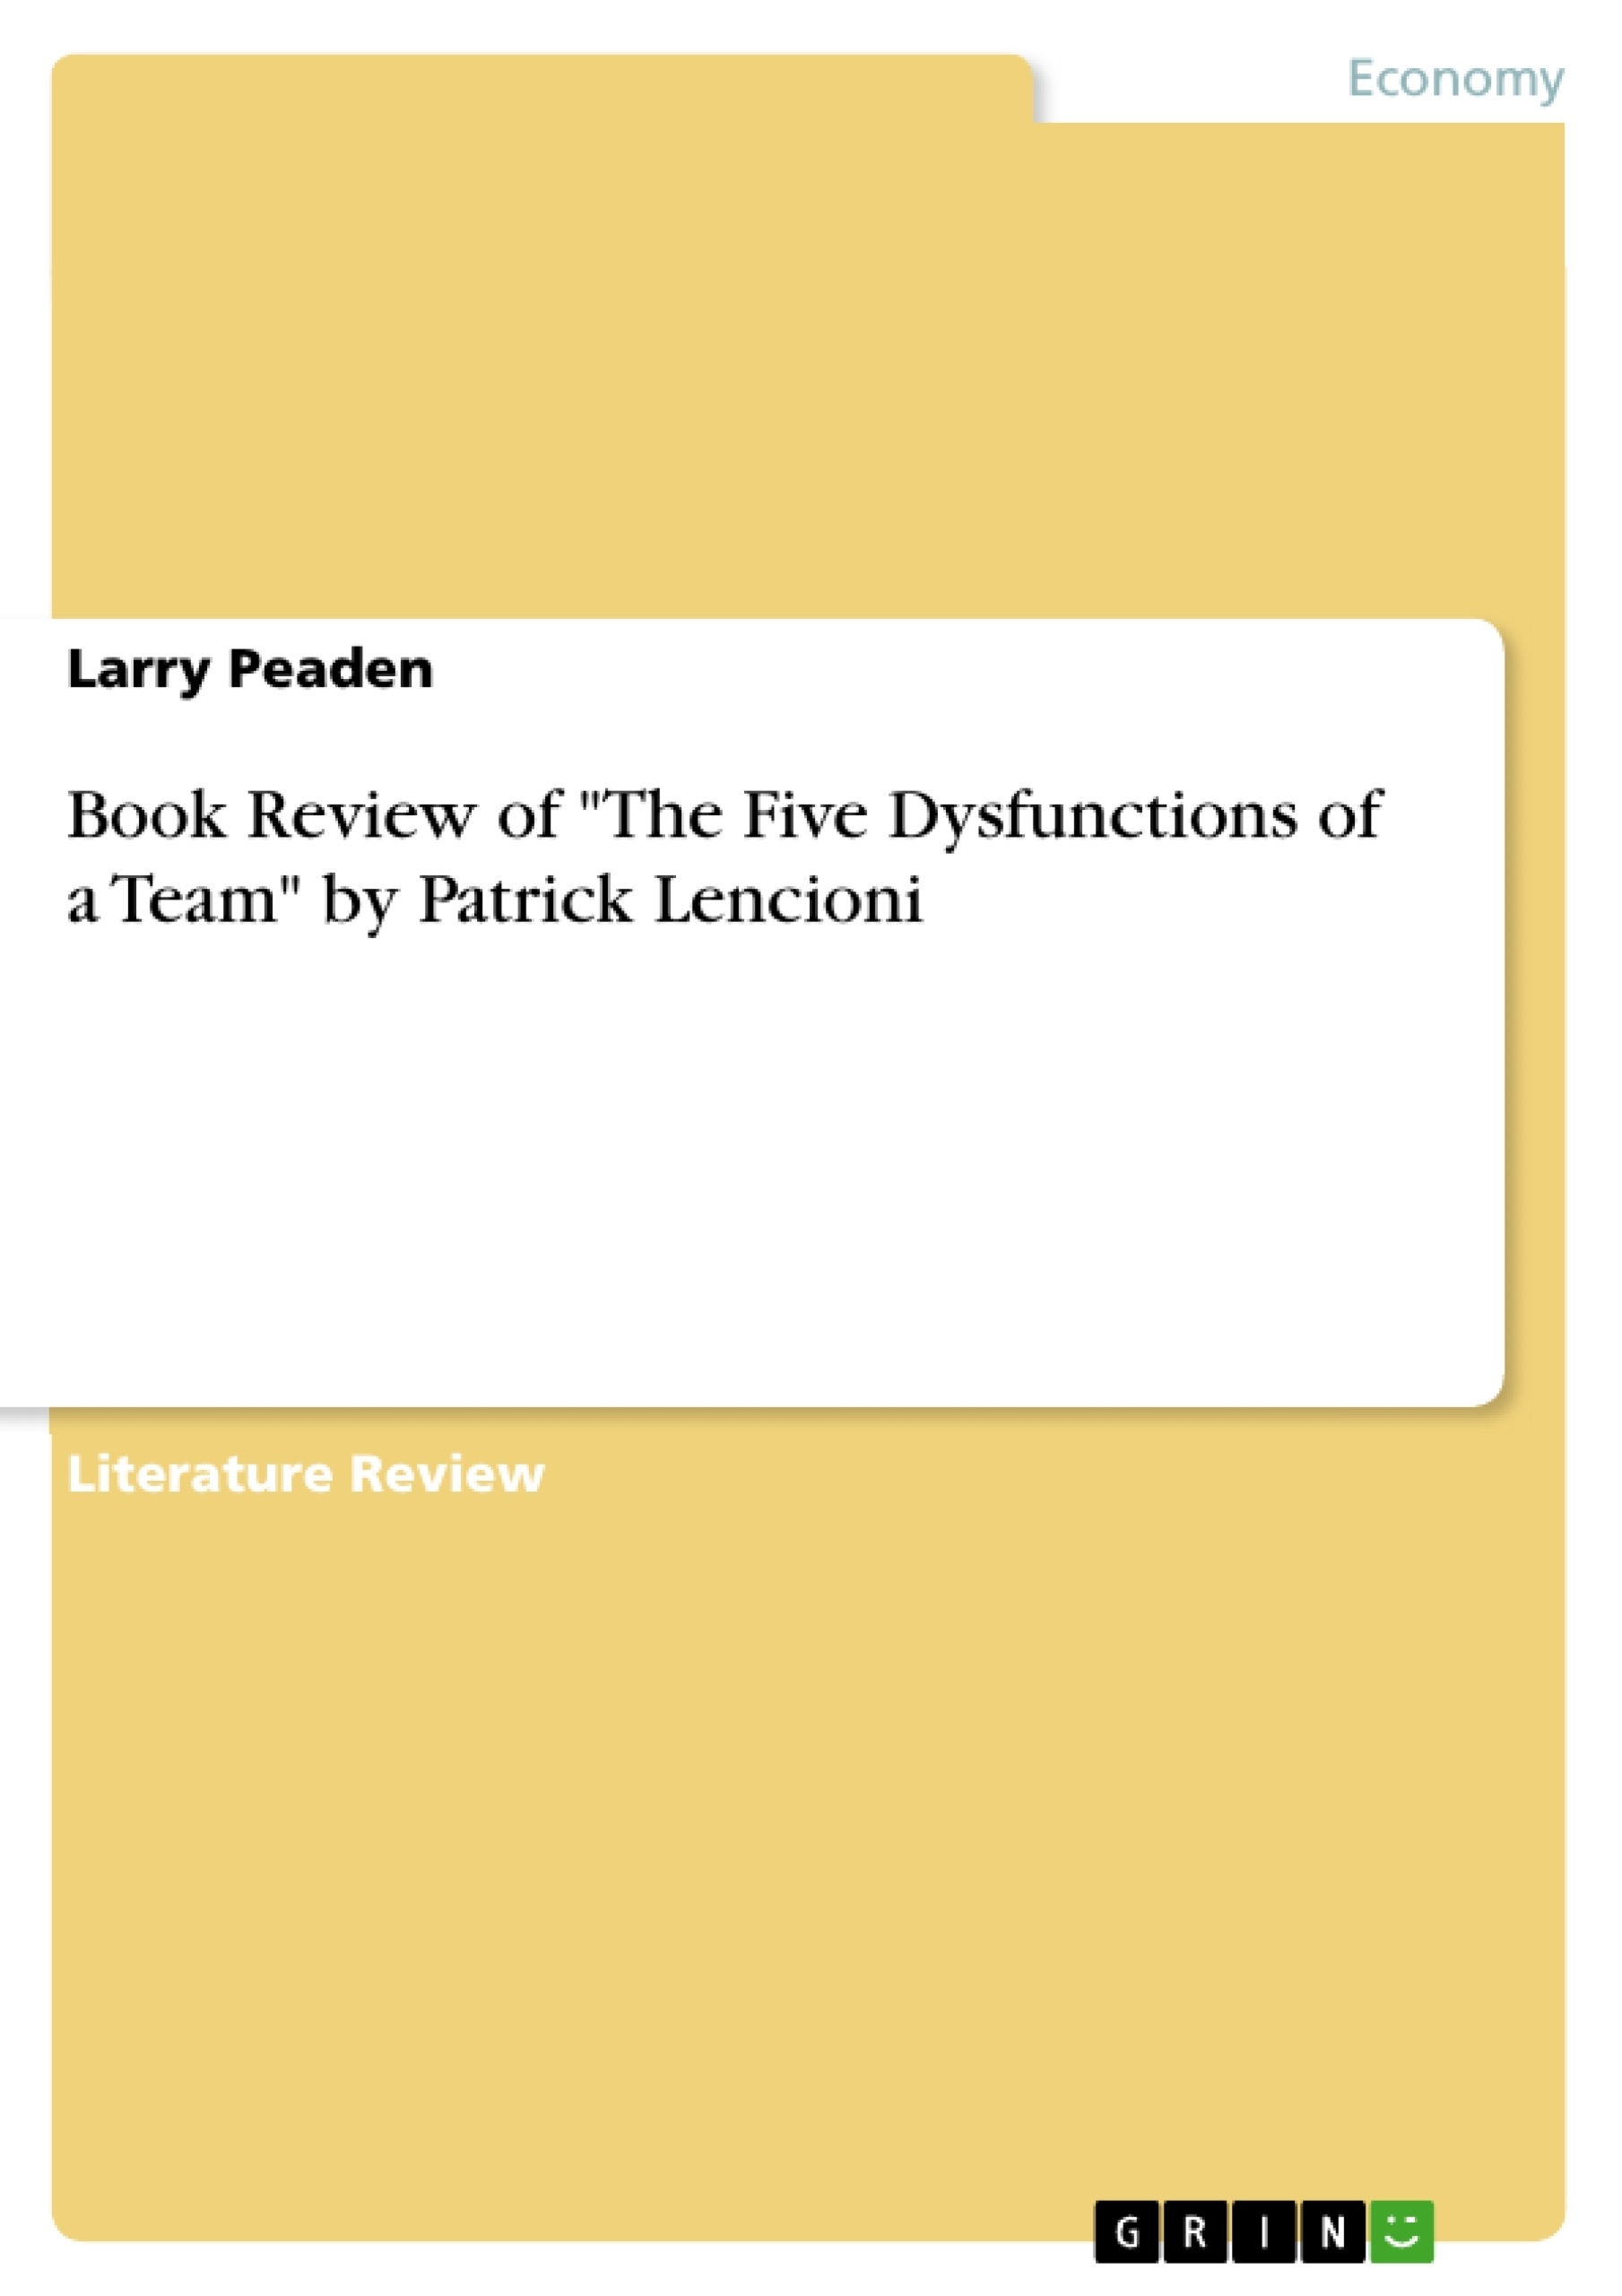 Titel: Book Review of "The Five Dysfunctions of a Team" by Patrick Lencioni